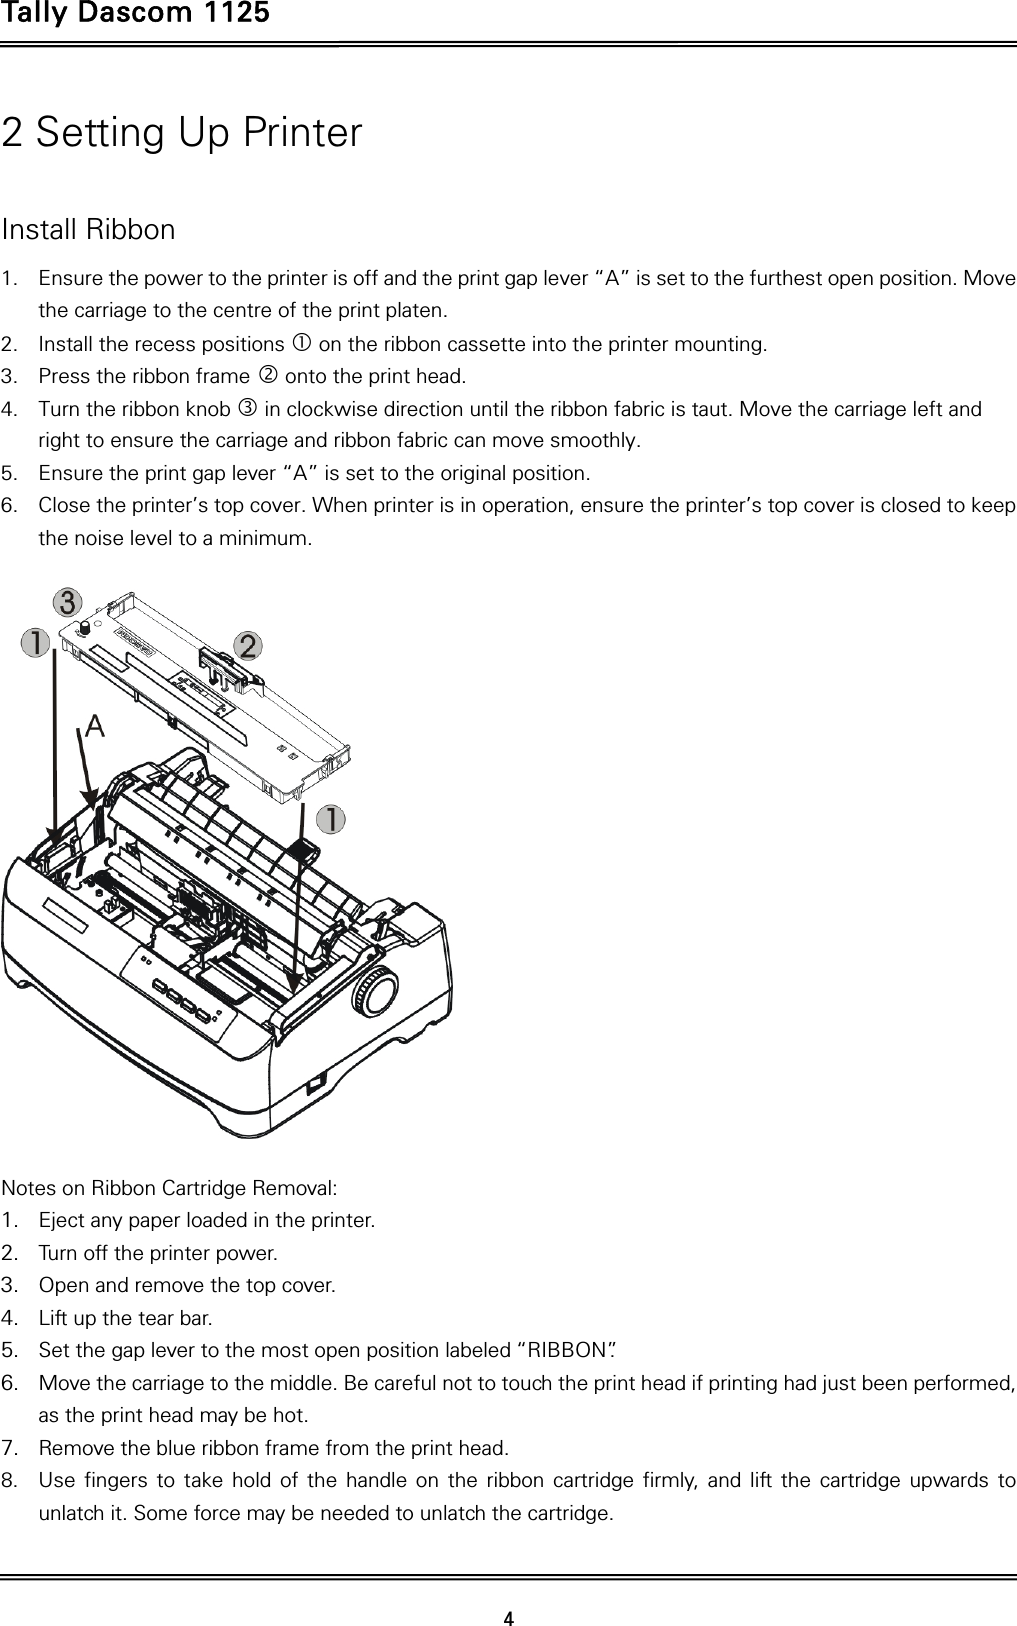 Tally Dascom 1125   4  2 Setting Up Printer  Install Ribbon 1. Ensure the power to the printer is off and the print gap lever “A” is set to the furthest open position. Move the carriage to the centre of the print platen. 2. Install the recess positions  on the ribbon cassette into the printer mounting. 3. Press the ribbon frame  onto the print head.   4. Turn the ribbon knob  in clockwise direction until the ribbon fabric is taut. Move the carriage left and right to ensure the carriage and ribbon fabric can move smoothly. 5. Ensure the print gap lever “A” is set to the original position.   6. Close the printer’s top cover. When printer is in operation, ensure the printer’s top cover is closed to keep the noise level to a minimum.    Notes on Ribbon Cartridge Removal: 1. Eject any paper loaded in the printer. 2. Turn off the printer power. 3. Open and remove the top cover. 4. Lift up the tear bar.   5. Set the gap lever to the most open position labeled “RIBBON”.   6. Move the carriage to the middle. Be careful not to touch the print head if printing had just been performed, as the print head may be hot. 7. Remove the blue ribbon frame from the print head.   8. Use fingers to take hold of the handle on the ribbon cartridge firmly, and lift the cartridge upwards to unlatch it. Some force may be needed to unlatch the cartridge. 